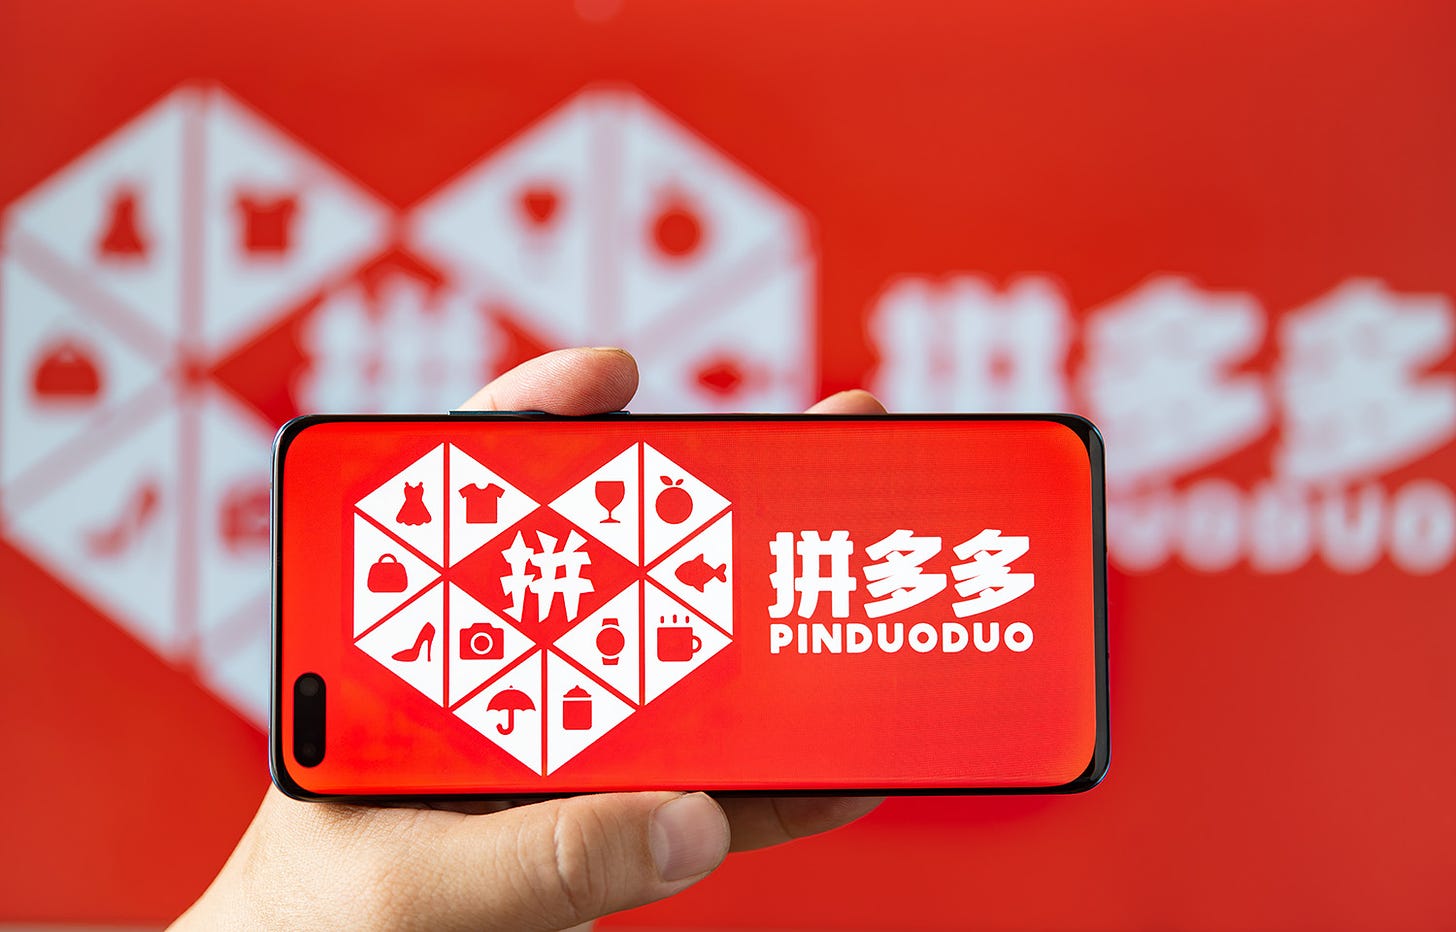 The Pinduoduo logo on a cell phone.